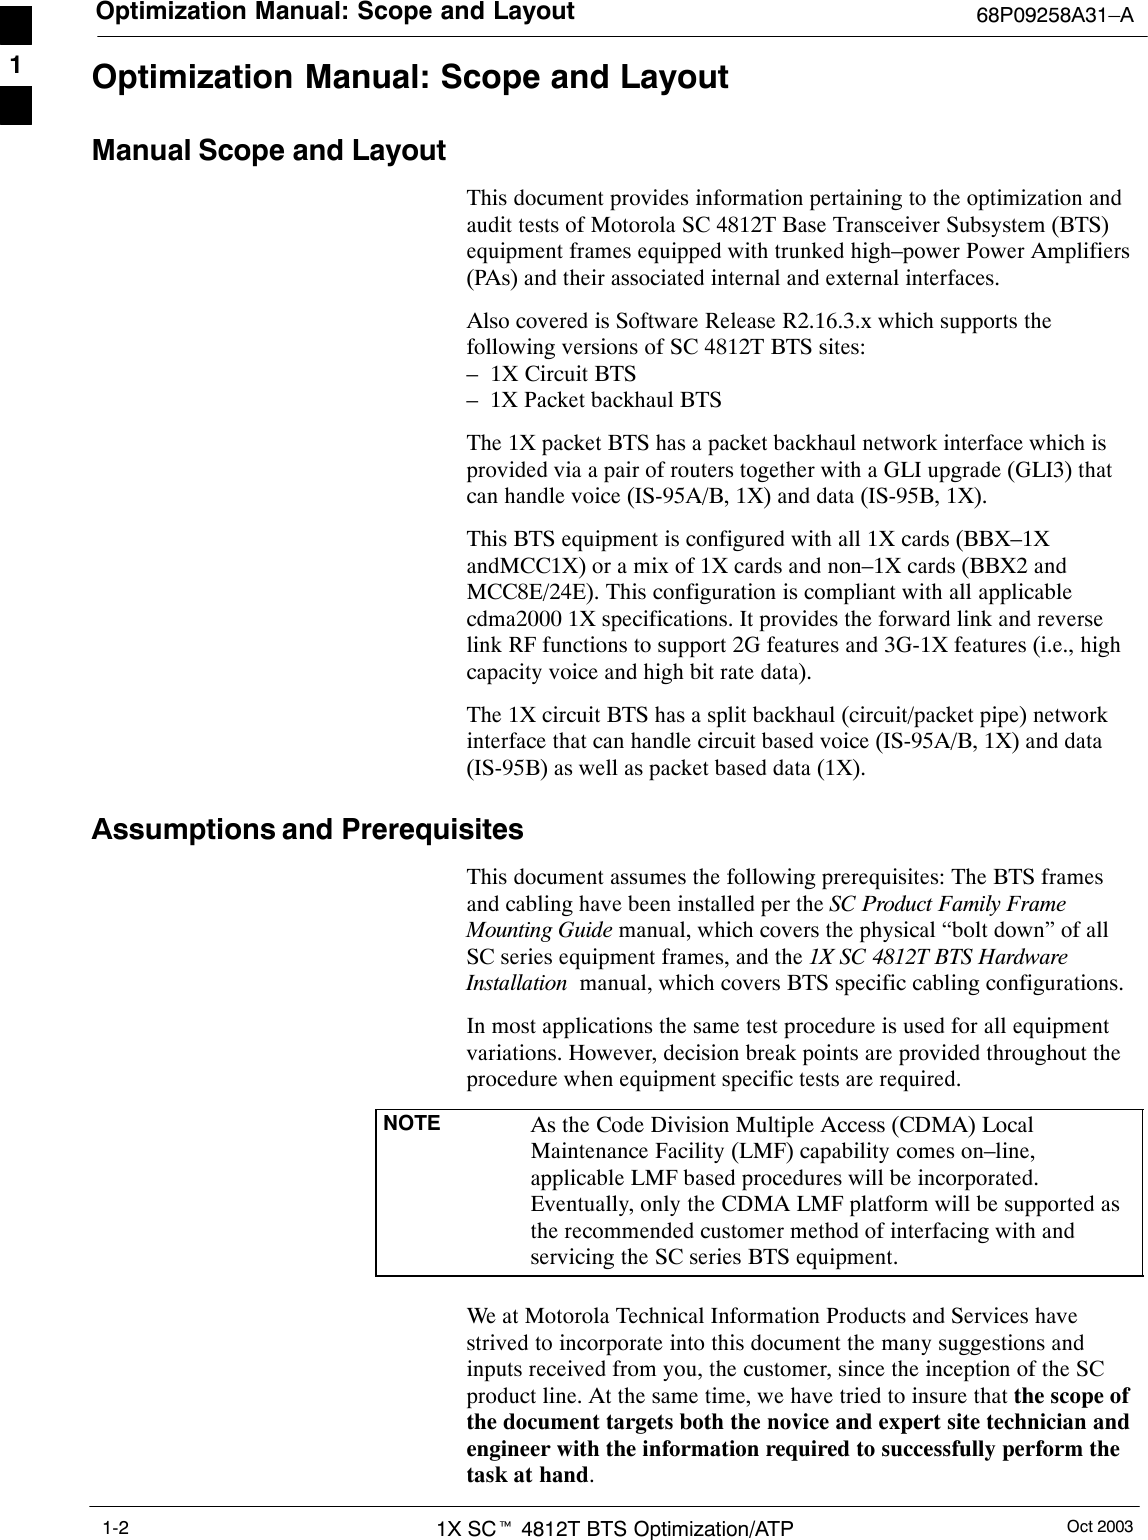 Optimization Manual: Scope and Layout 68P09258A31–AOct 20031X SCt 4812T BTS Optimization/ATP1-2Optimization Manual: Scope and LayoutManual Scope and LayoutThis document provides information pertaining to the optimization andaudit tests of Motorola SC 4812T Base Transceiver Subsystem (BTS)equipment frames equipped with trunked high–power Power Amplifiers(PAs) and their associated internal and external interfaces.Also covered is Software Release R2.16.3.x which supports thefollowing versions of SC 4812T BTS sites:–  1X Circuit BTS–  1X Packet backhaul BTSThe 1X packet BTS has a packet backhaul network interface which isprovided via a pair of routers together with a GLI upgrade (GLI3) thatcan handle voice (IS-95A/B, 1X) and data (IS-95B, 1X).This BTS equipment is configured with all 1X cards (BBX–1XandMCC1X) or a mix of 1X cards and non–1X cards (BBX2 andMCC8E/24E). This configuration is compliant with all applicablecdma2000 1X specifications. It provides the forward link and reverselink RF functions to support 2G features and 3G-1X features (i.e., highcapacity voice and high bit rate data).The 1X circuit BTS has a split backhaul (circuit/packet pipe) networkinterface that can handle circuit based voice (IS-95A/B, 1X) and data(IS-95B) as well as packet based data (1X).Assumptions and PrerequisitesThis document assumes the following prerequisites: The BTS framesand cabling have been installed per the SC Product Family FrameMounting Guide manual, which covers the physical “bolt down” of allSC series equipment frames, and the 1X SC 4812T BTS HardwareInstallation  manual, which covers BTS specific cabling configurations.In most applications the same test procedure is used for all equipmentvariations. However, decision break points are provided throughout theprocedure when equipment specific tests are required.NOTE As the Code Division Multiple Access (CDMA) LocalMaintenance Facility (LMF) capability comes on–line,applicable LMF based procedures will be incorporated.Eventually, only the CDMA LMF platform will be supported asthe recommended customer method of interfacing with andservicing the SC series BTS equipment.We at Motorola Technical Information Products and Services havestrived to incorporate into this document the many suggestions andinputs received from you, the customer, since the inception of the SCproduct line. At the same time, we have tried to insure that the scope ofthe document targets both the novice and expert site technician andengineer with the information required to successfully perform thetask at hand.1